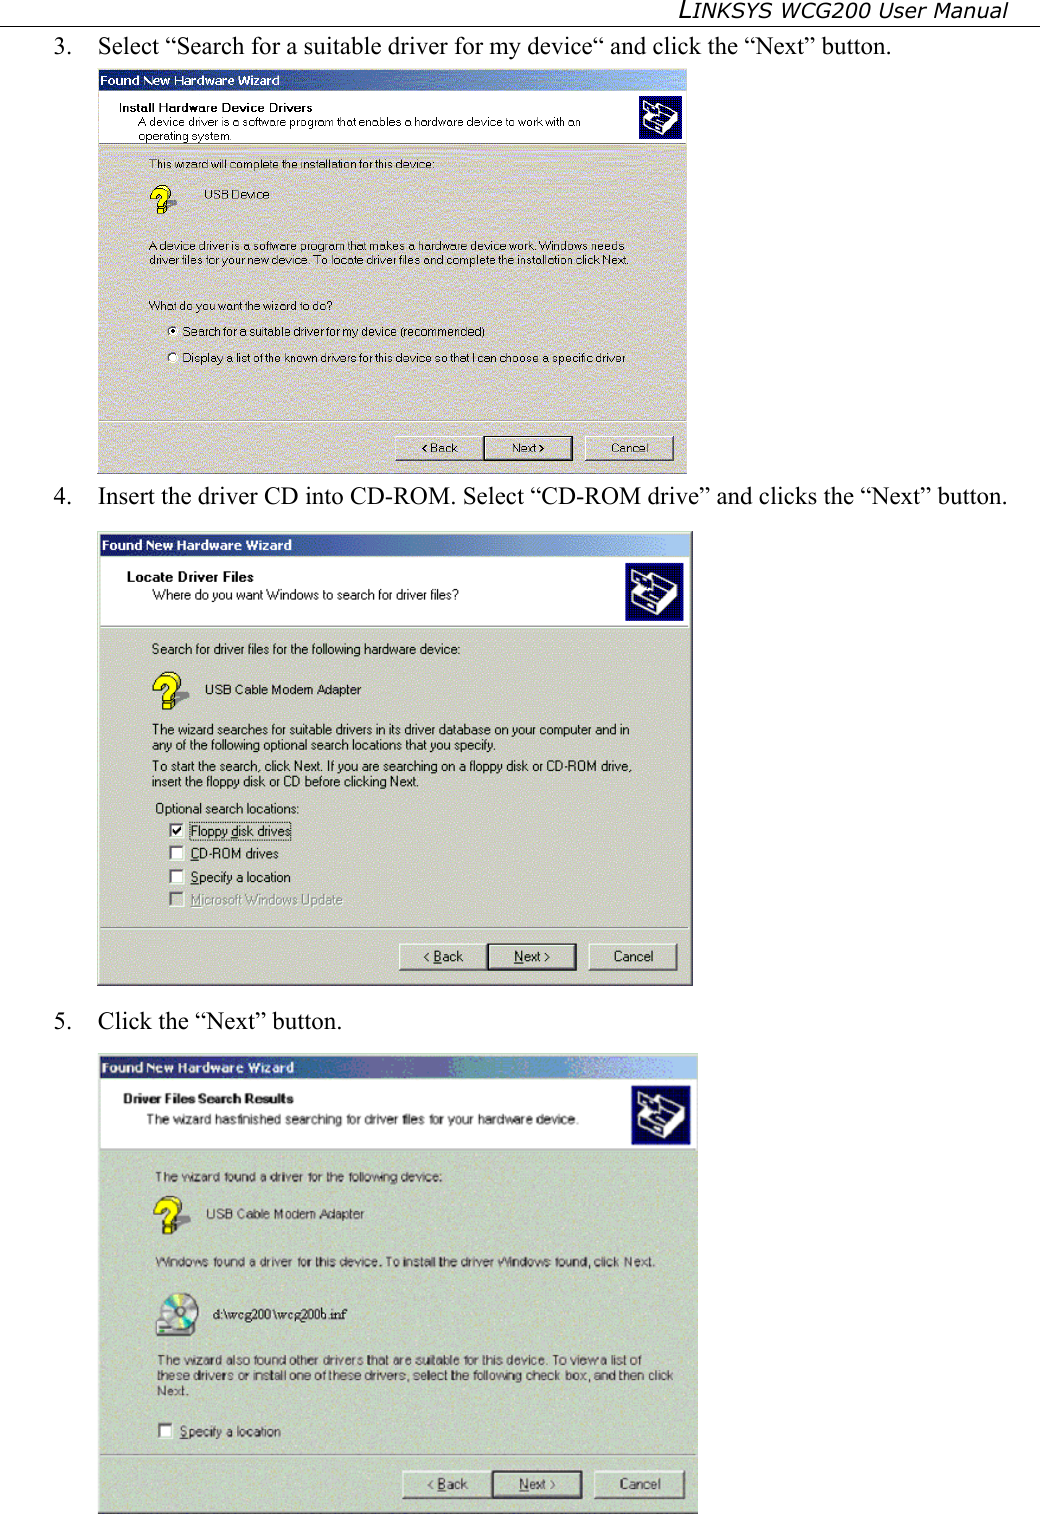 LINKSYS WCG200 User Manual   3.  Select “Search for a suitable driver for my device“ and click the “Next” button.  4.  Insert the driver CD into CD-ROM. Select “CD-ROM drive” and clicks the “Next” button.  5.  Click the “Next” button.  